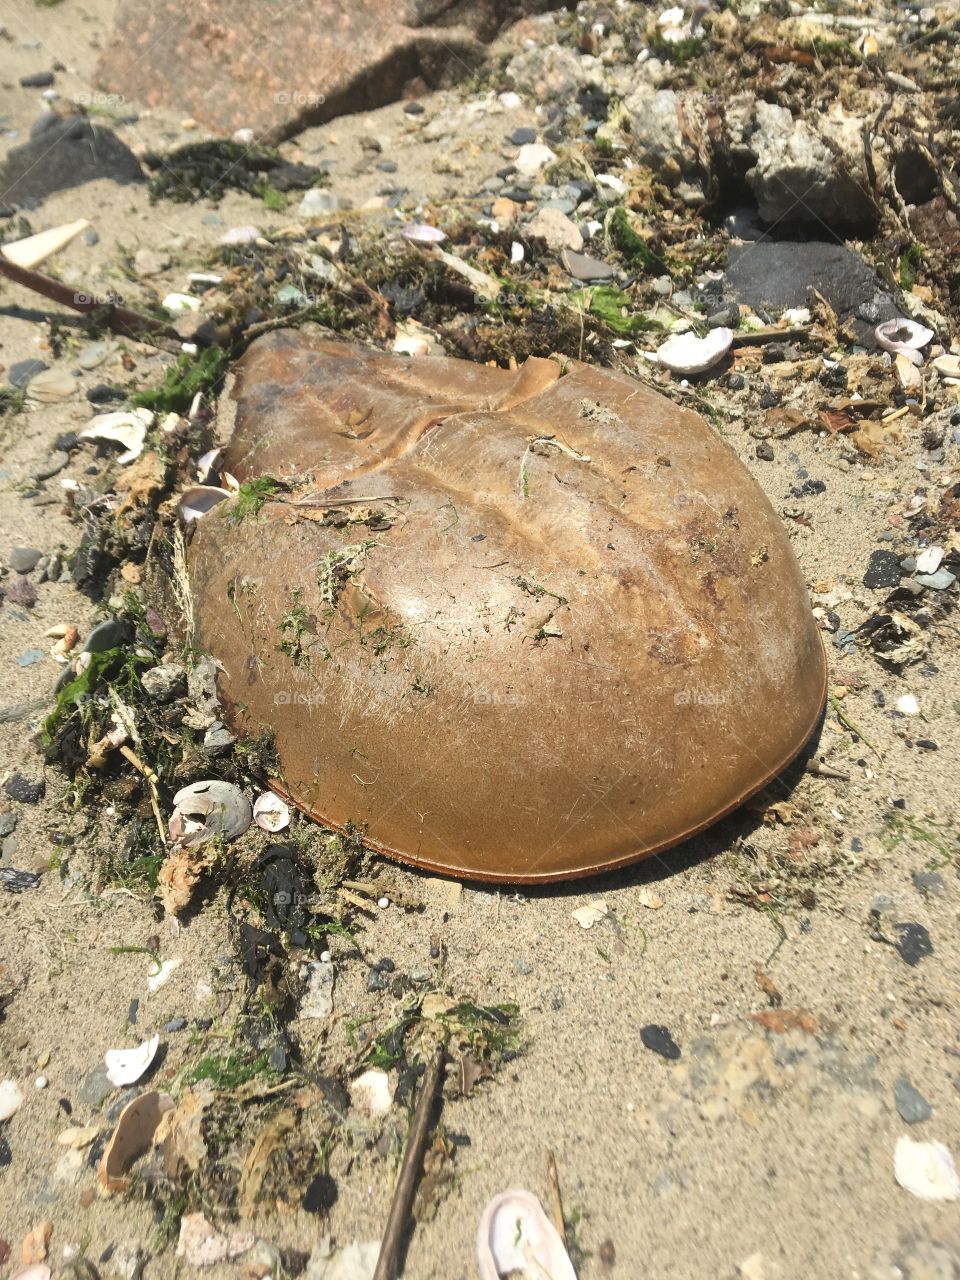 A molt from a female horseshoe crab laying on the detritus on the beach